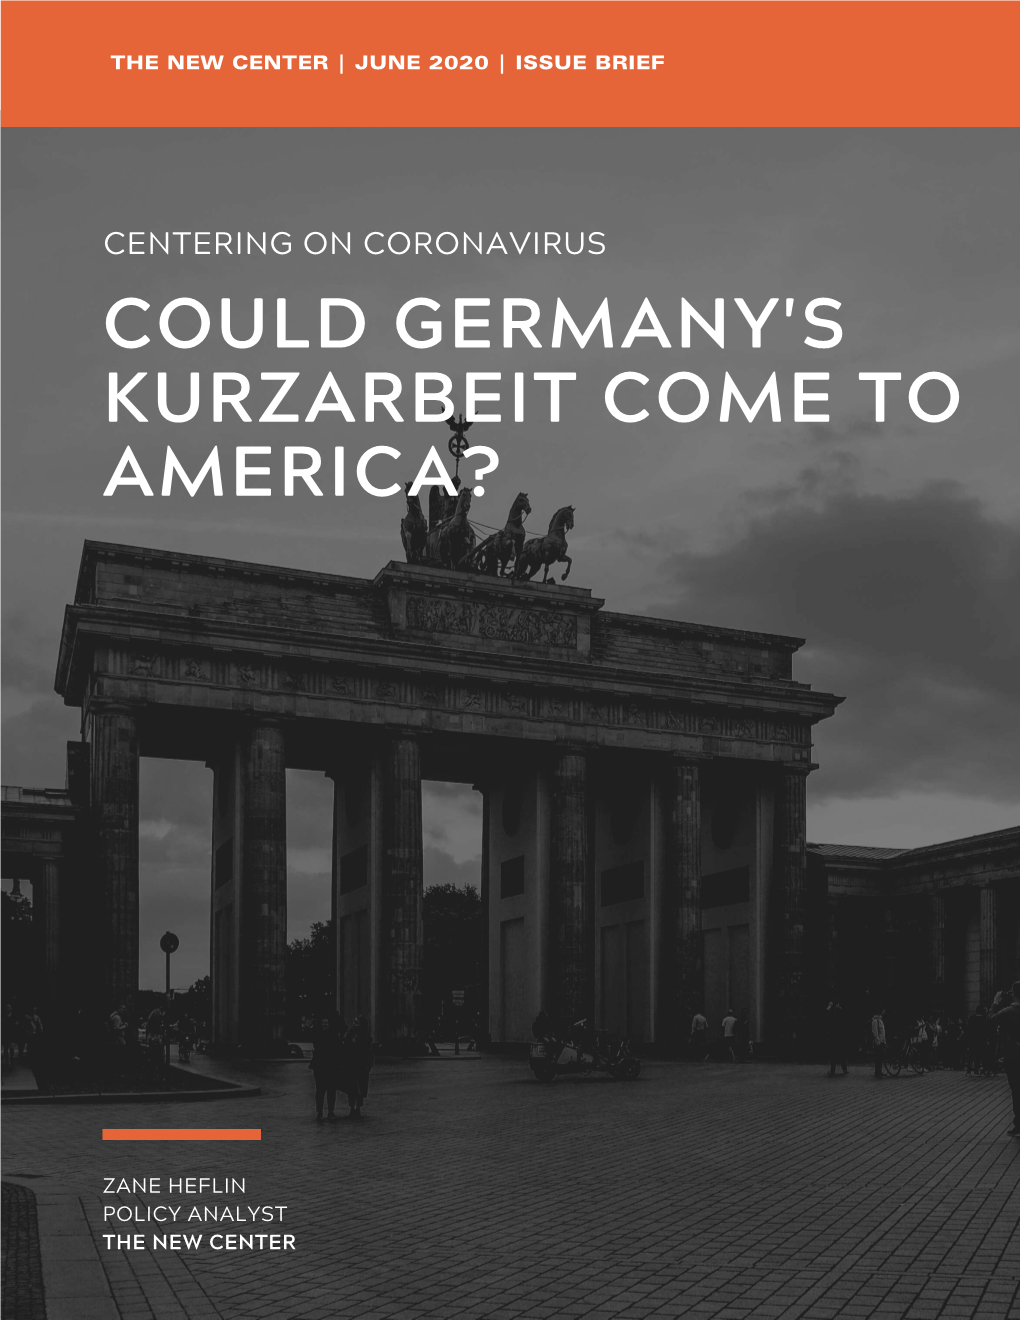 Centering on Coronavirus Could Germany's Kurzarbeit Come to America?